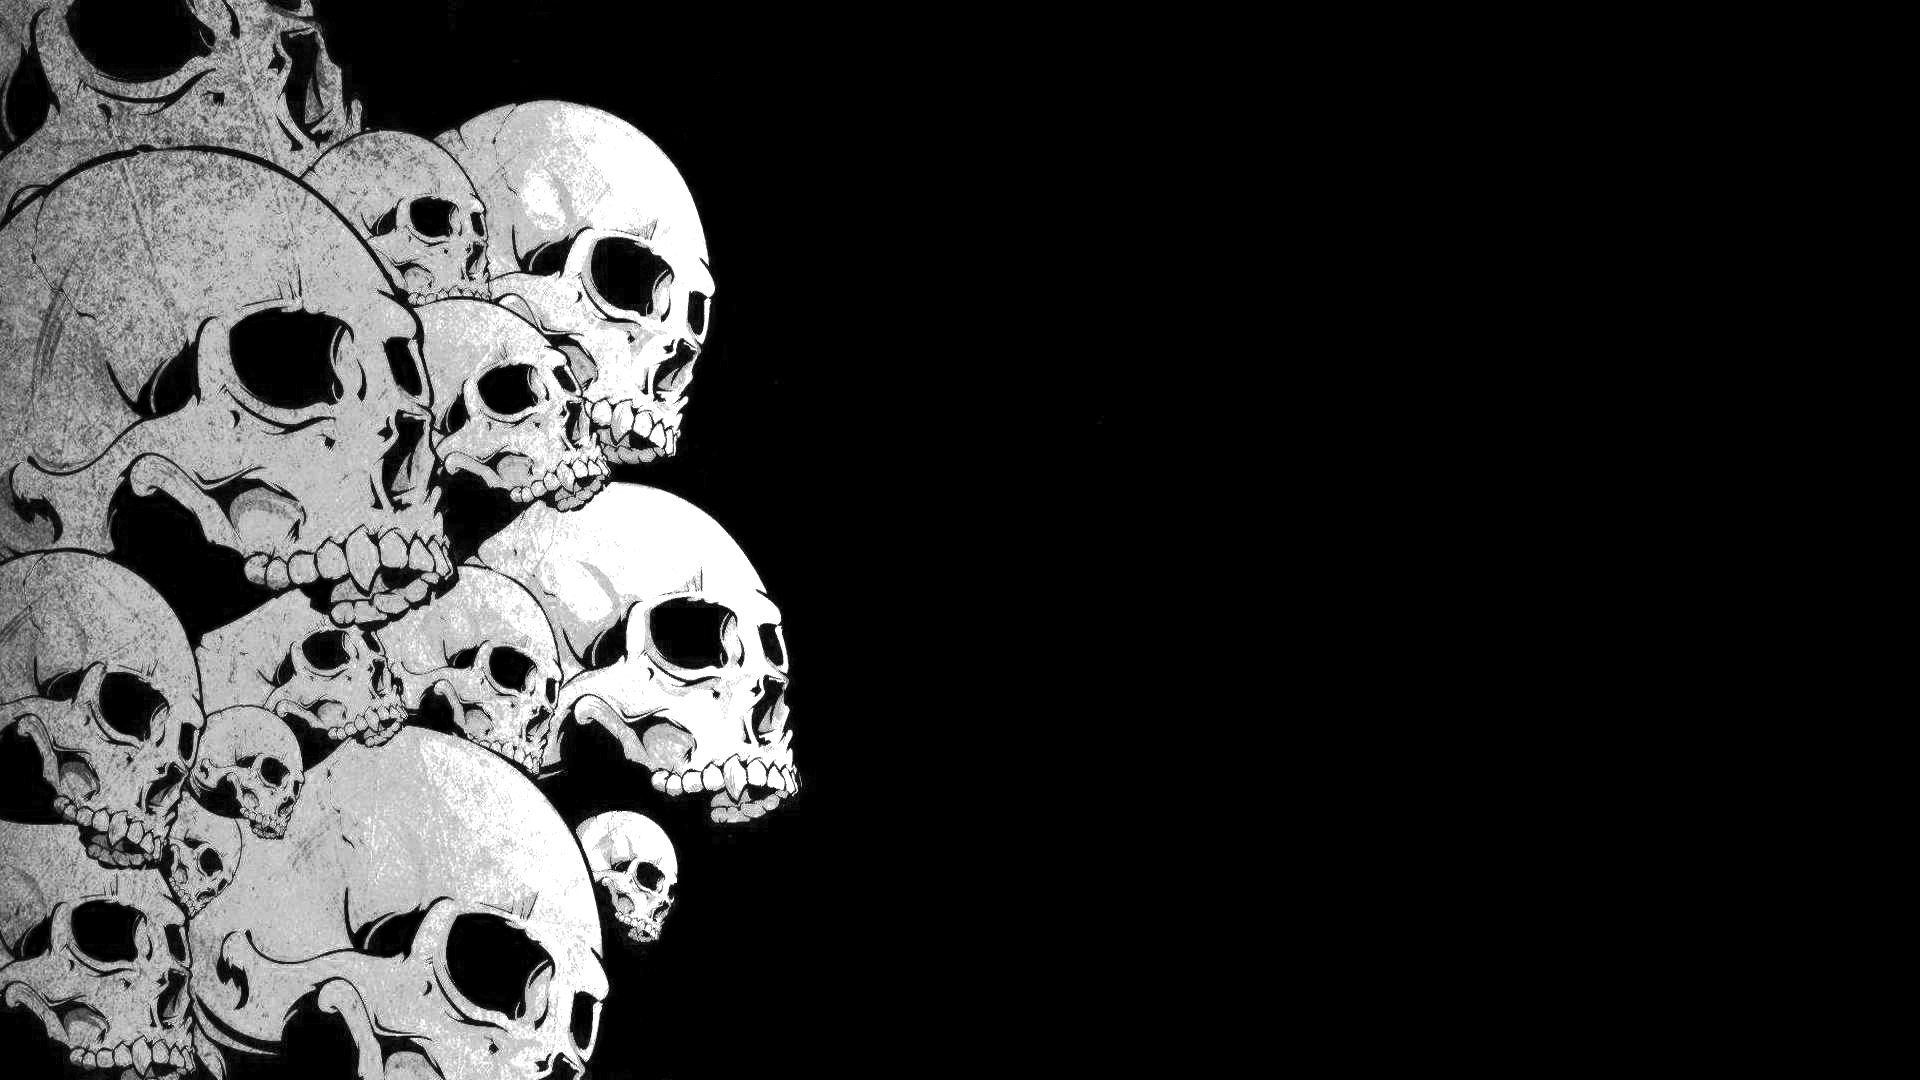 Background HD Skull Wallpapers 1080p